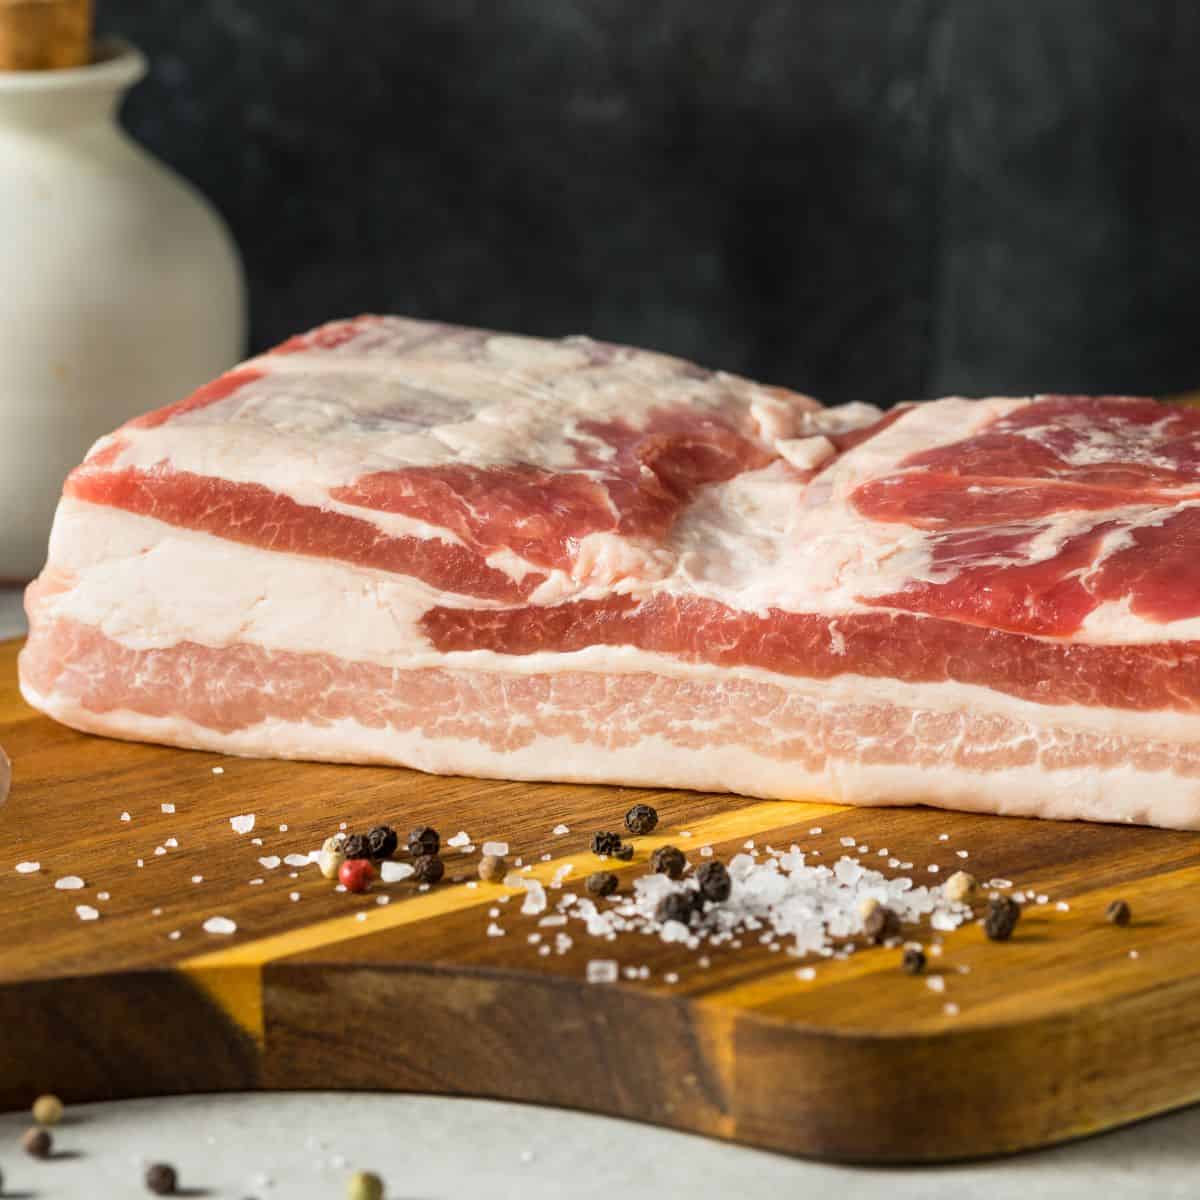 Slab of raw pork belly on a wooden cutting board with some salt and black pepper